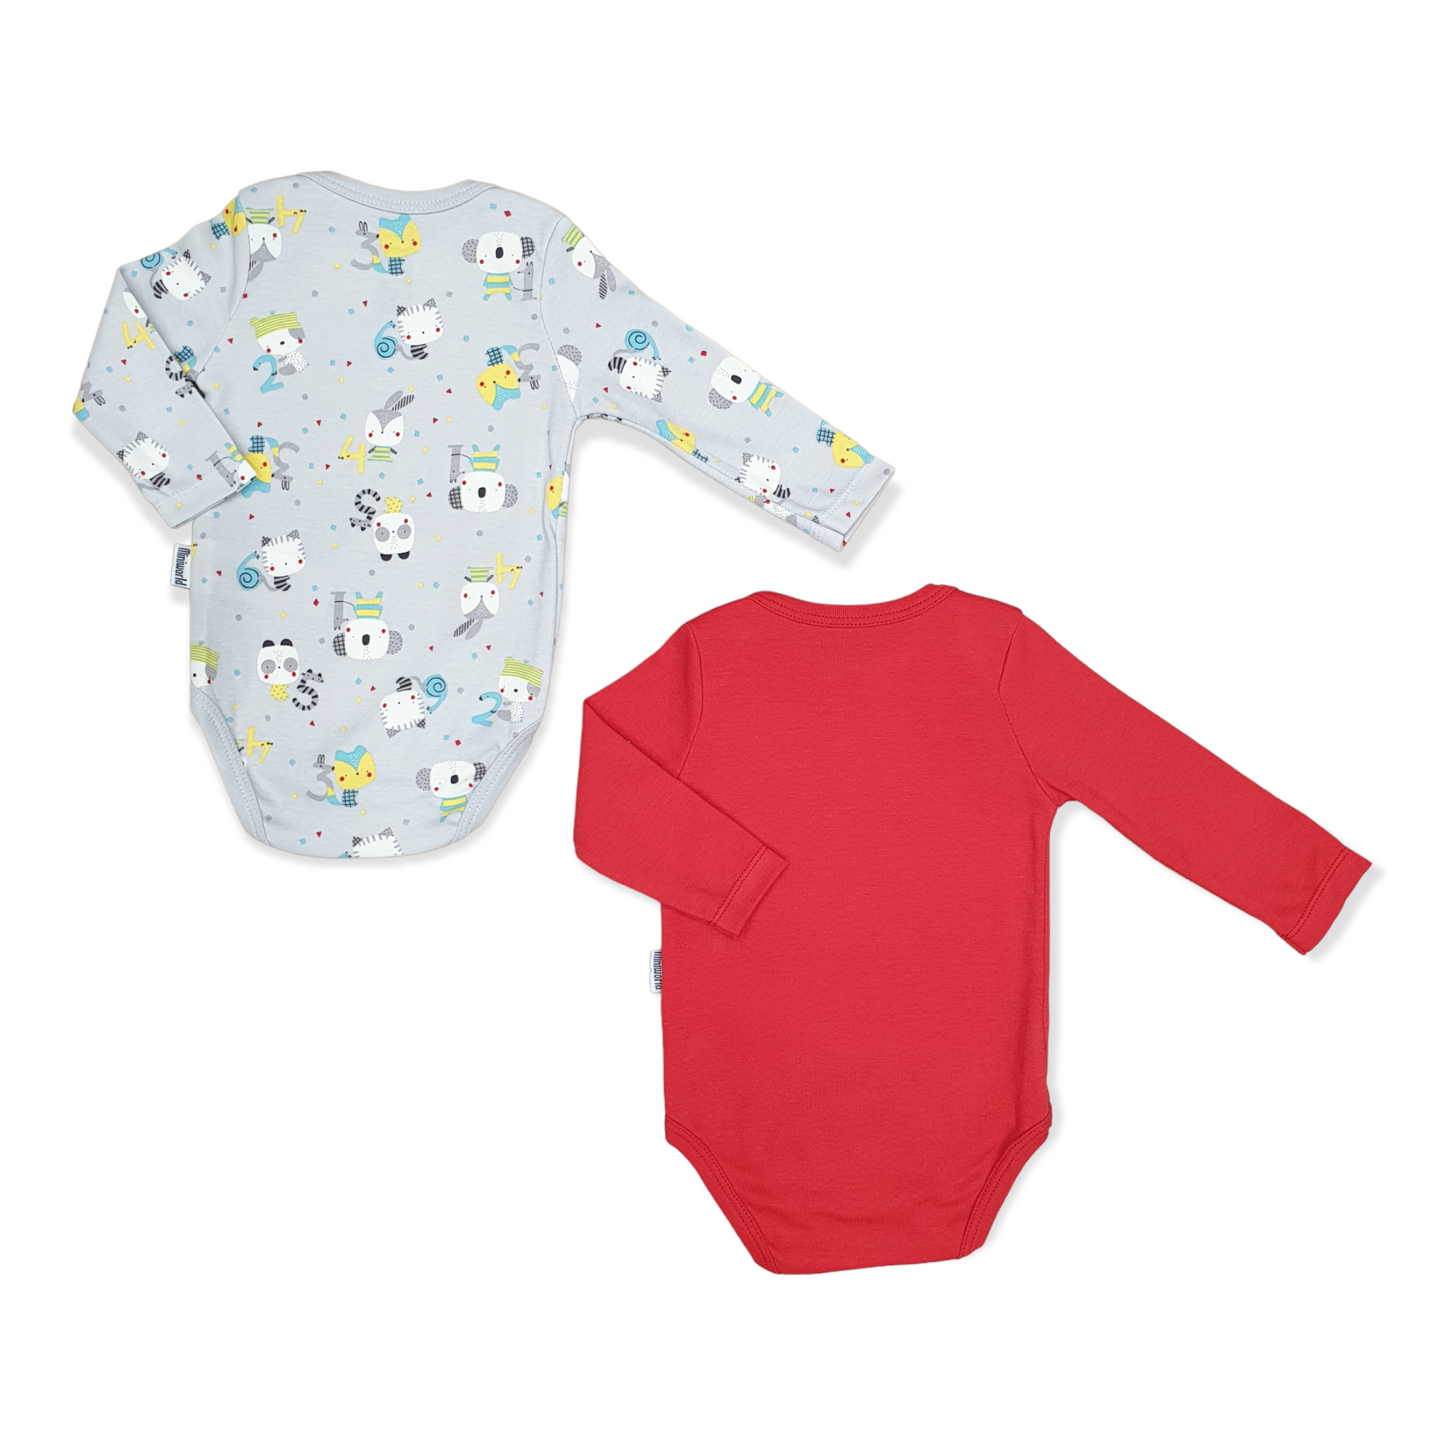 2pcs Red Lets Play Together Unisex Body-Animals, Body, Bodysuit, Boy, Cat, catboy, catgirl, Cats, catunisex, Creeper, Girl, Grey, Long Sleeve, Numbers, Onesie, Panda, Play, Rabbit, Red, Together, Unisex-Miniworld-[Too Twee]-[Tootwee]-[baby]-[newborn]-[clothes]-[essentials]-[toys]-[Lebanon]